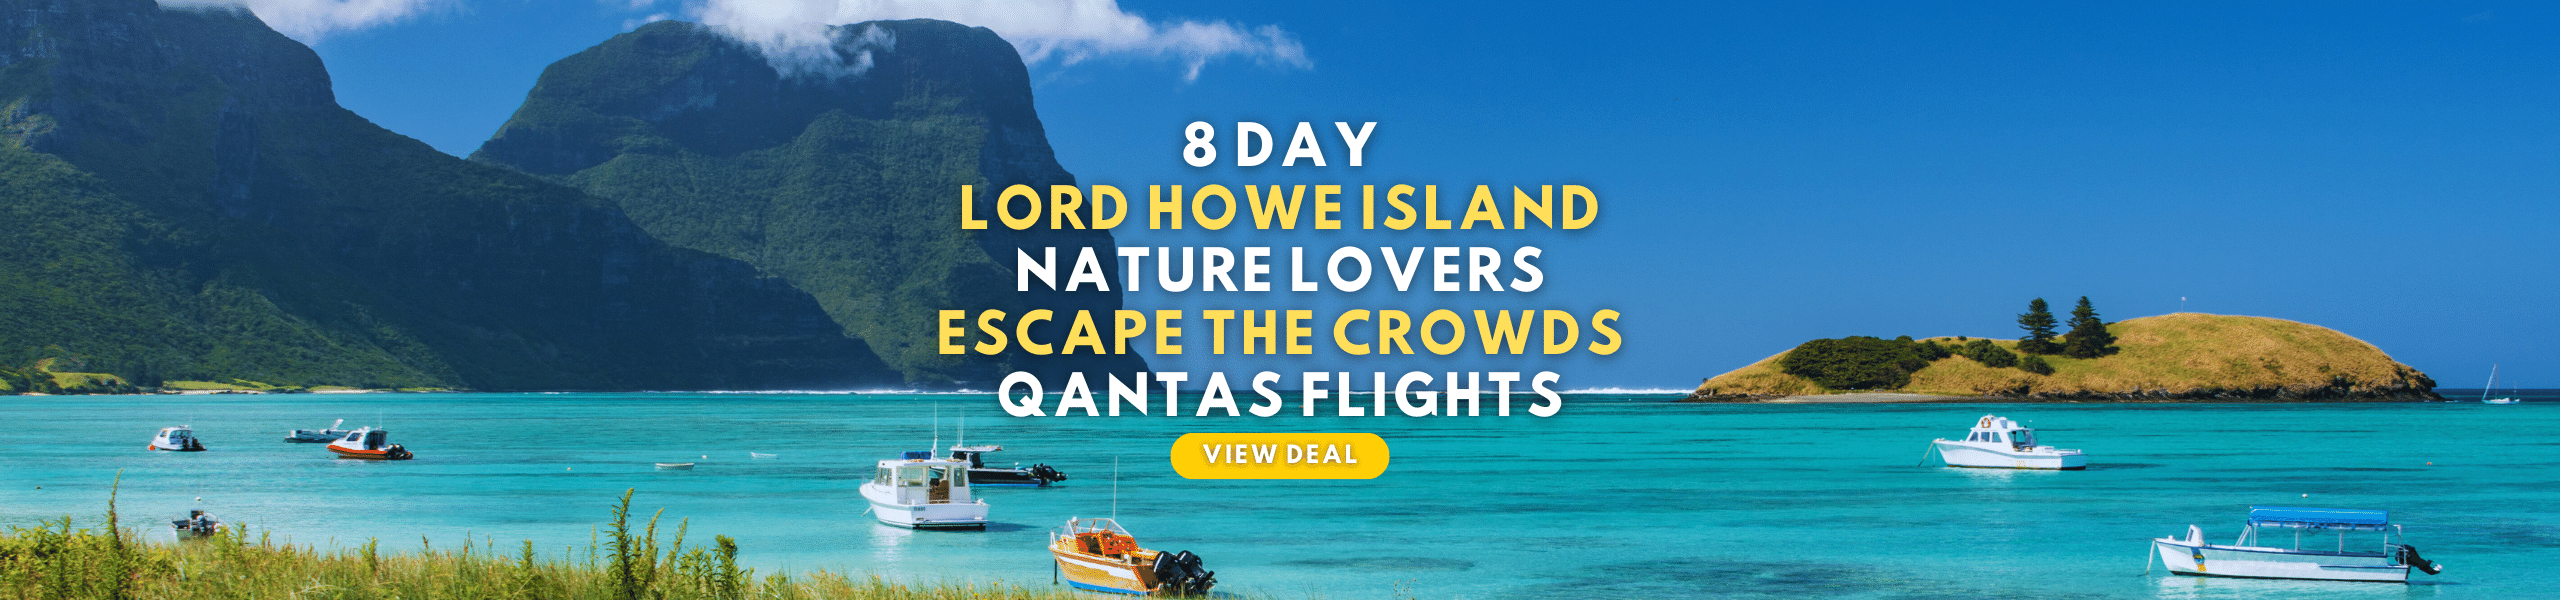 Package Tours To Lord Howe Island From Australia 